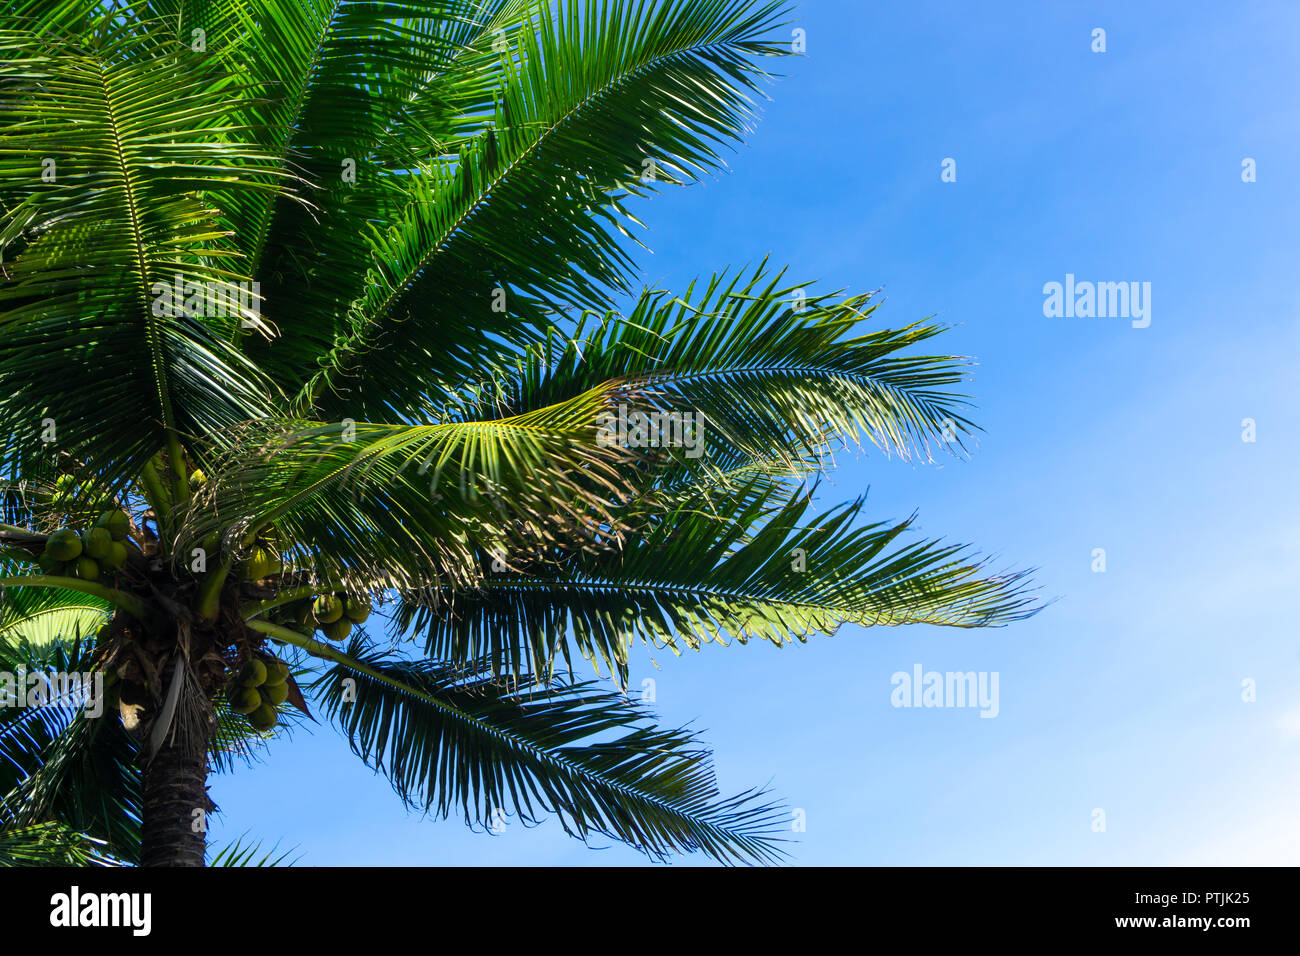 Palm trees or coconut trees against the blue sky. Stock Photo